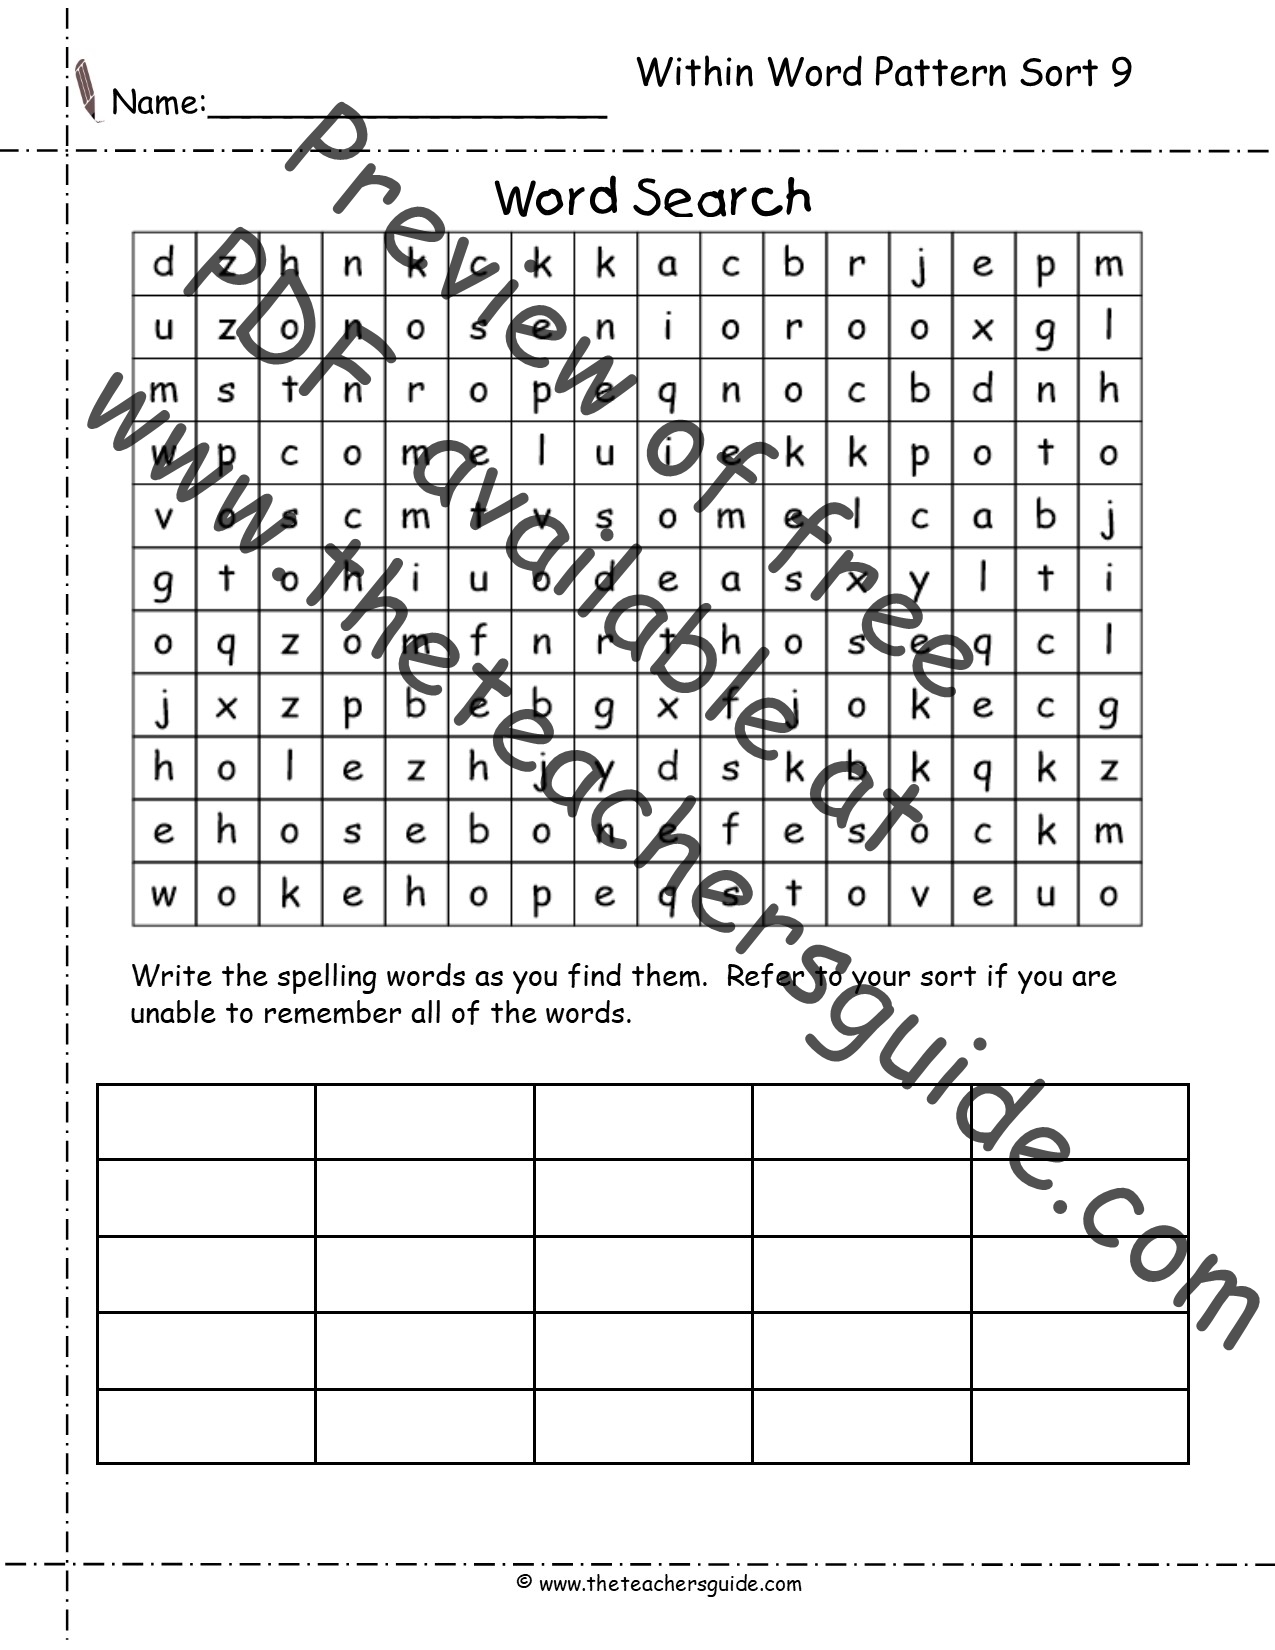 Words Their Way Within Word Patterns Worksheets With Regard To Words Their Way Blank Sort Template